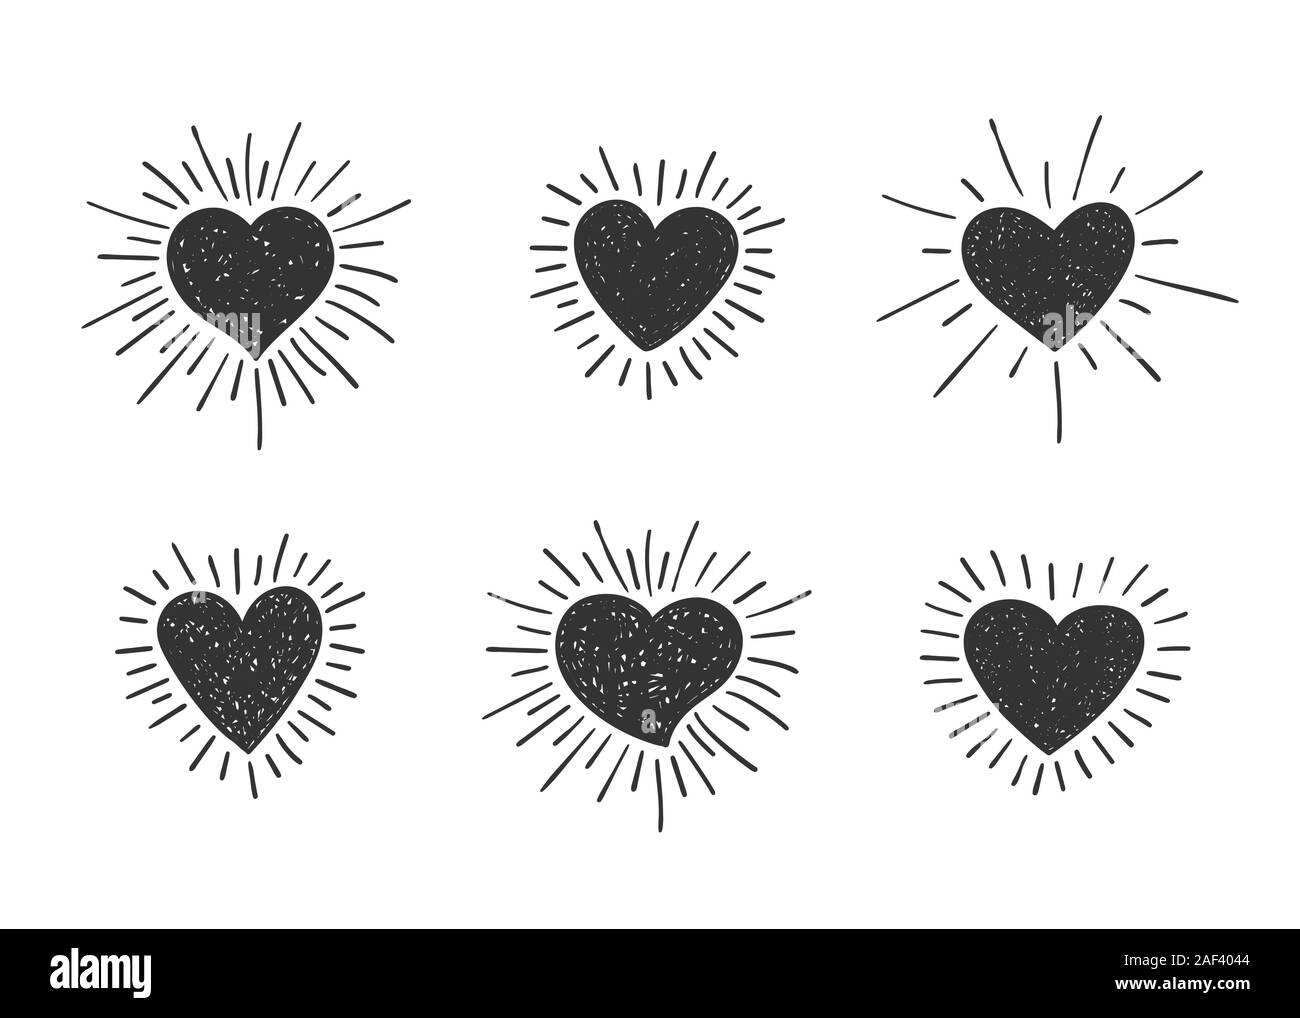 Set of doodle textured heart shapes with retro styled sun rays. Collection of different hand drawn romantic hearts for sticker, label, love logo and Stock Vector